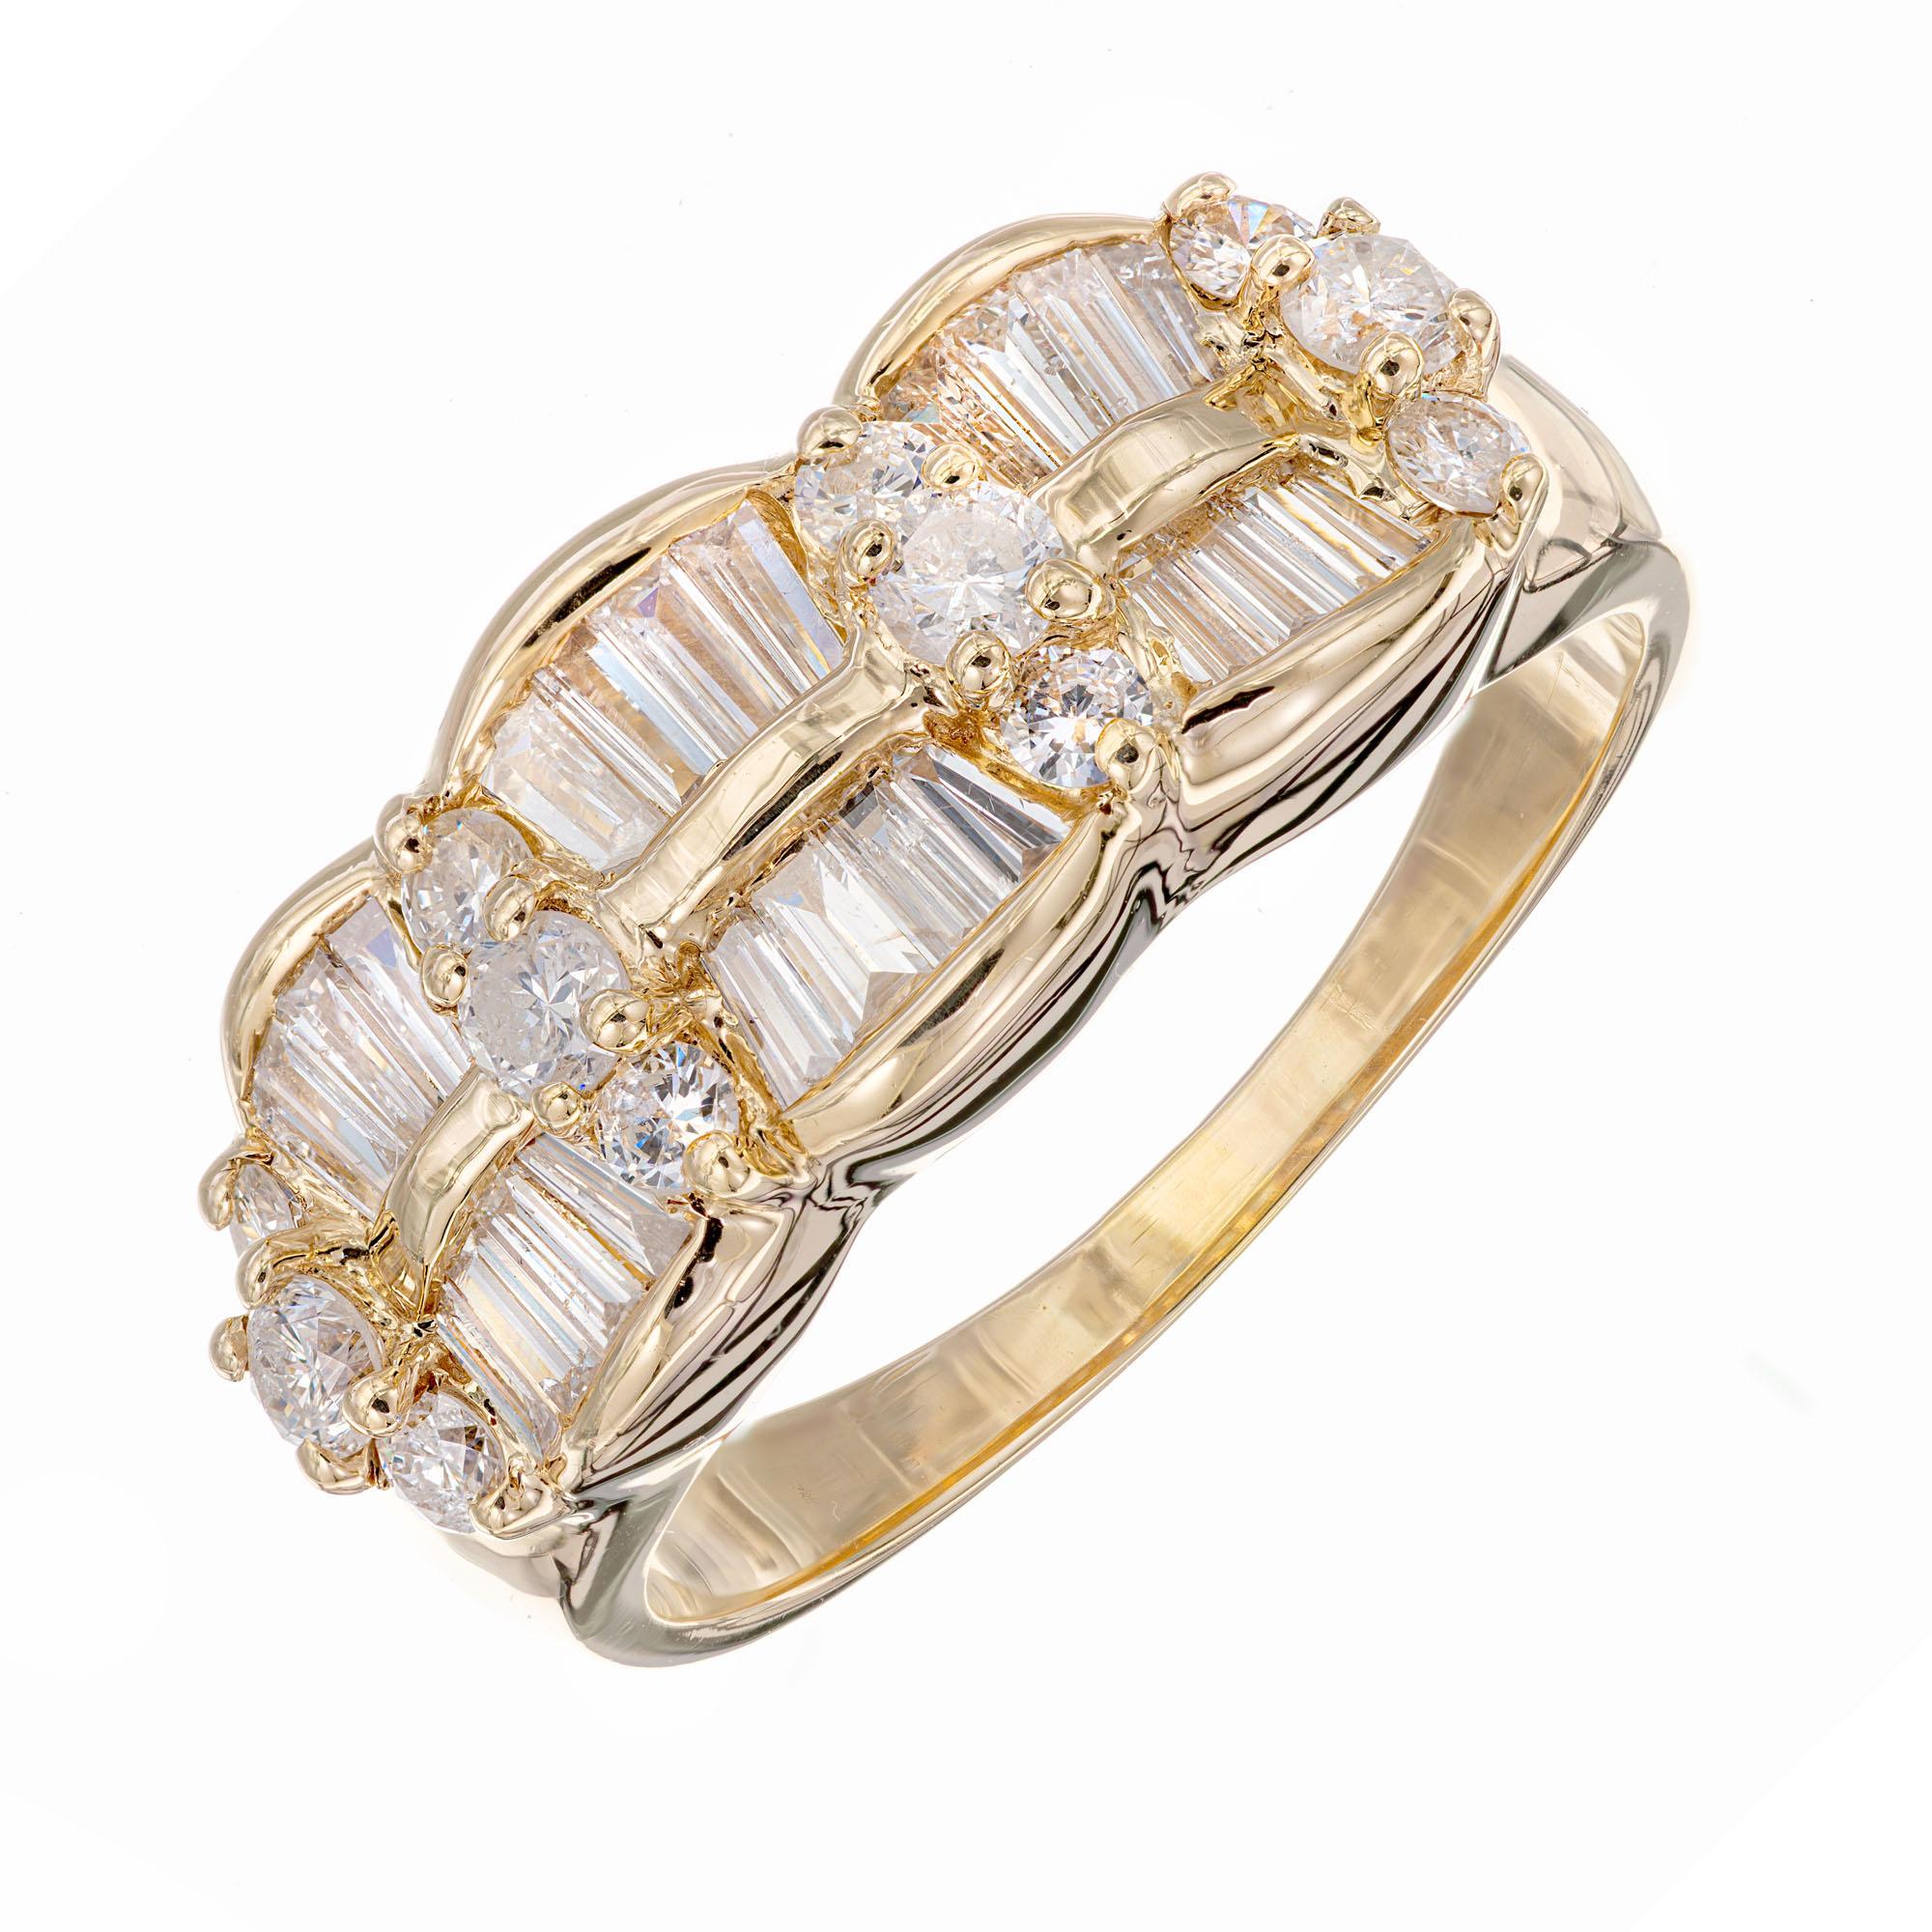 1960's diamond wave motif band ring. 12 round and 24 tapered baguette diamonds in a 14k yellow gold setting. 

12 round diamonds, approx. total weight .31cts, H, SI
24 tapered baguette diamonds, approx. total weight 1.33cts, H, SI
Size 9.75 and